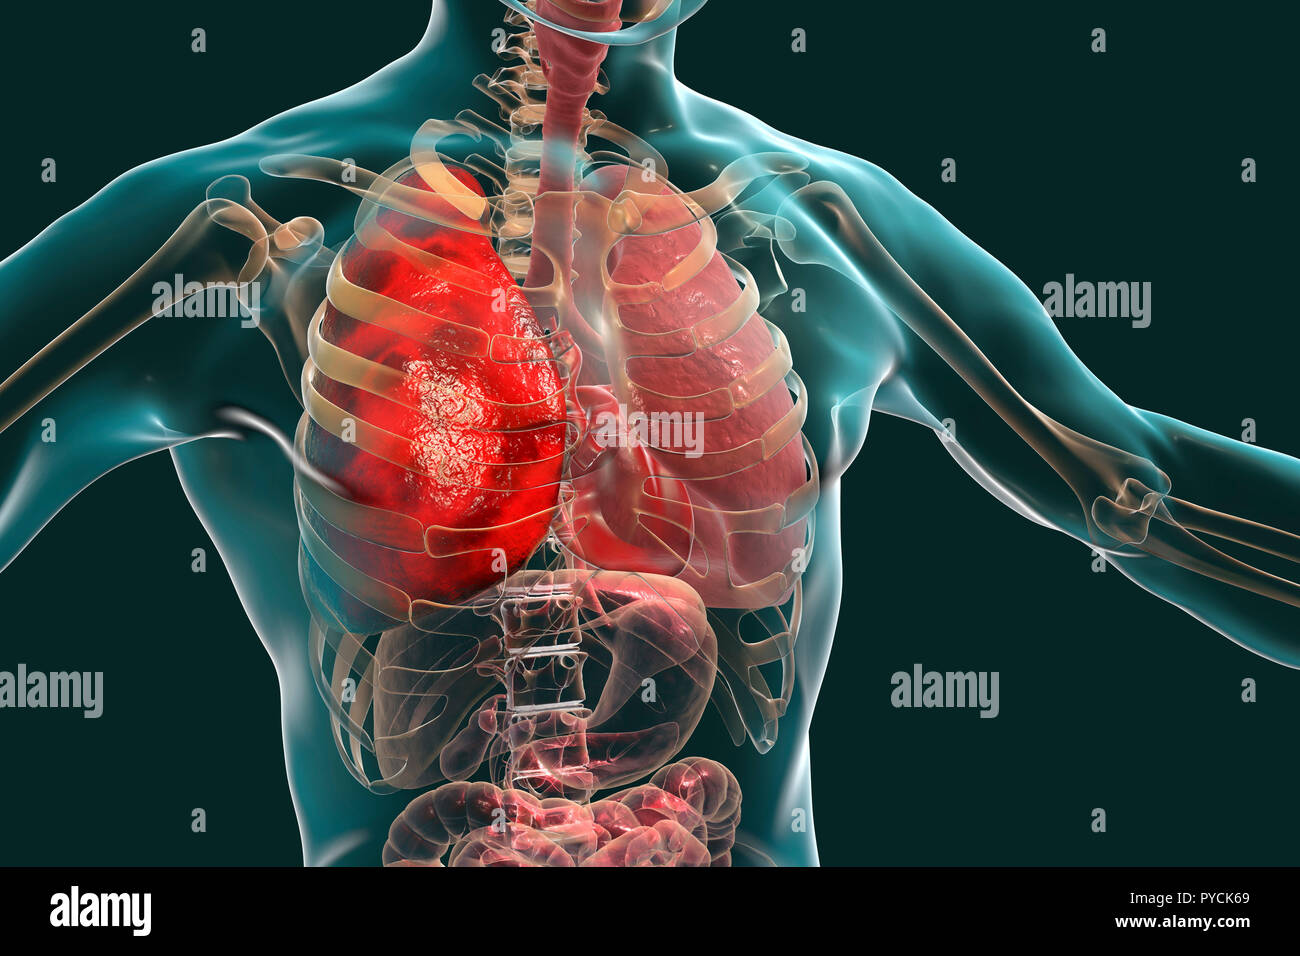 Pneumonia, illustration. Pneumonia is an inflammatory condition of the lung. Stock Photo